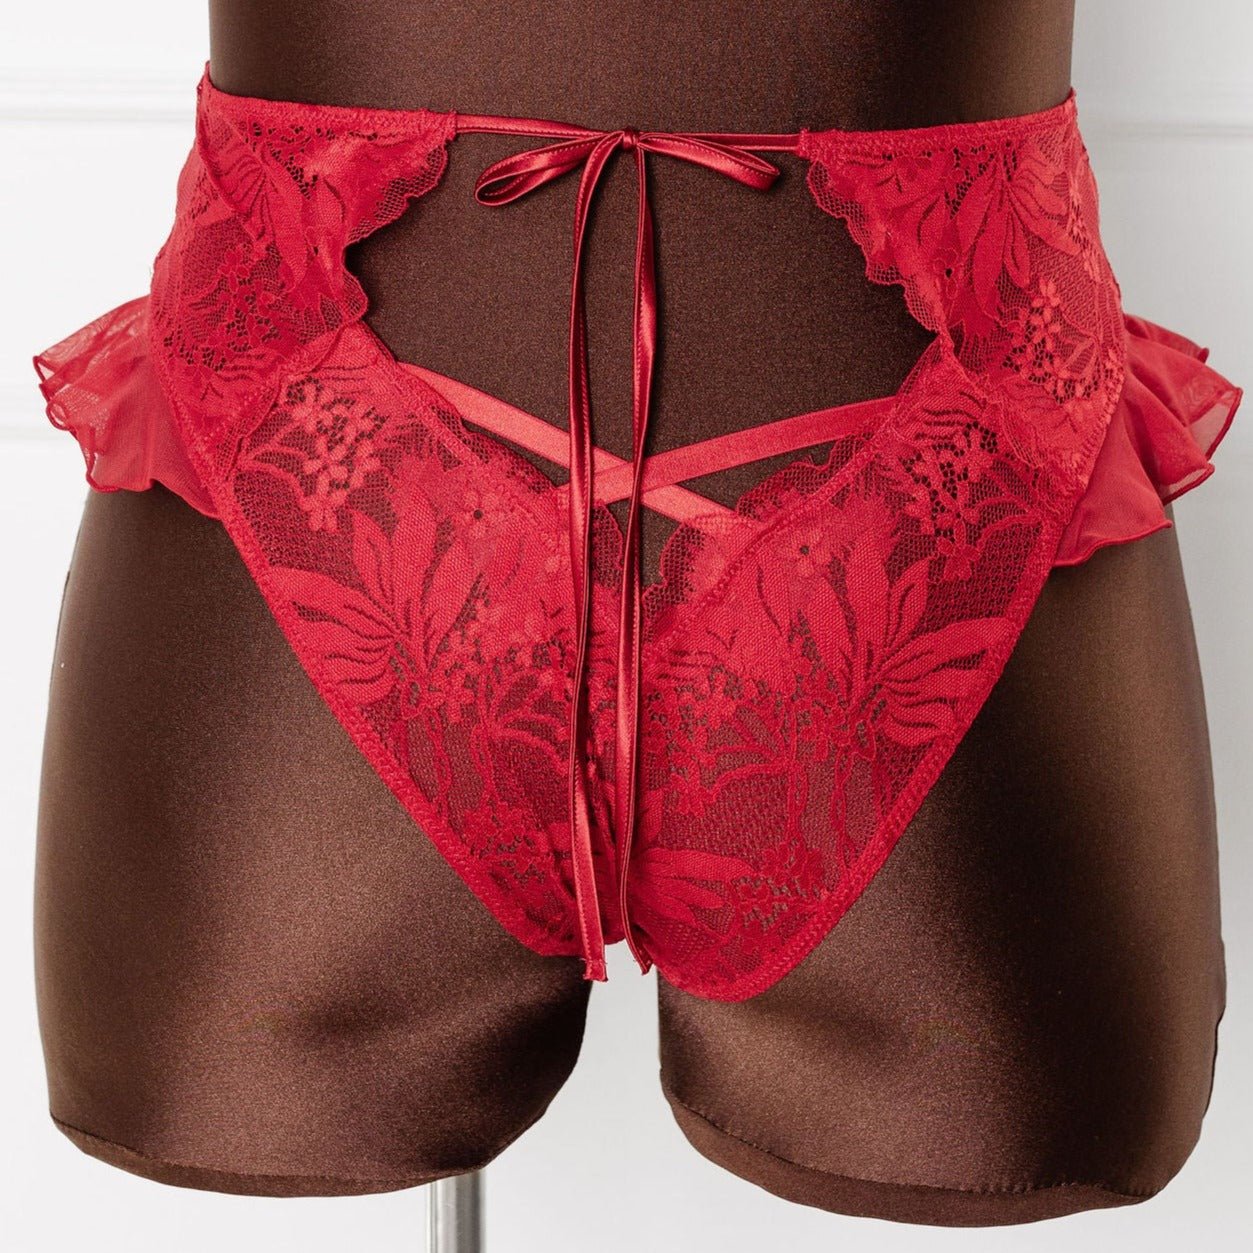 Lacy High Leg Crotchless Panty - Scarlet Red - Mentionables